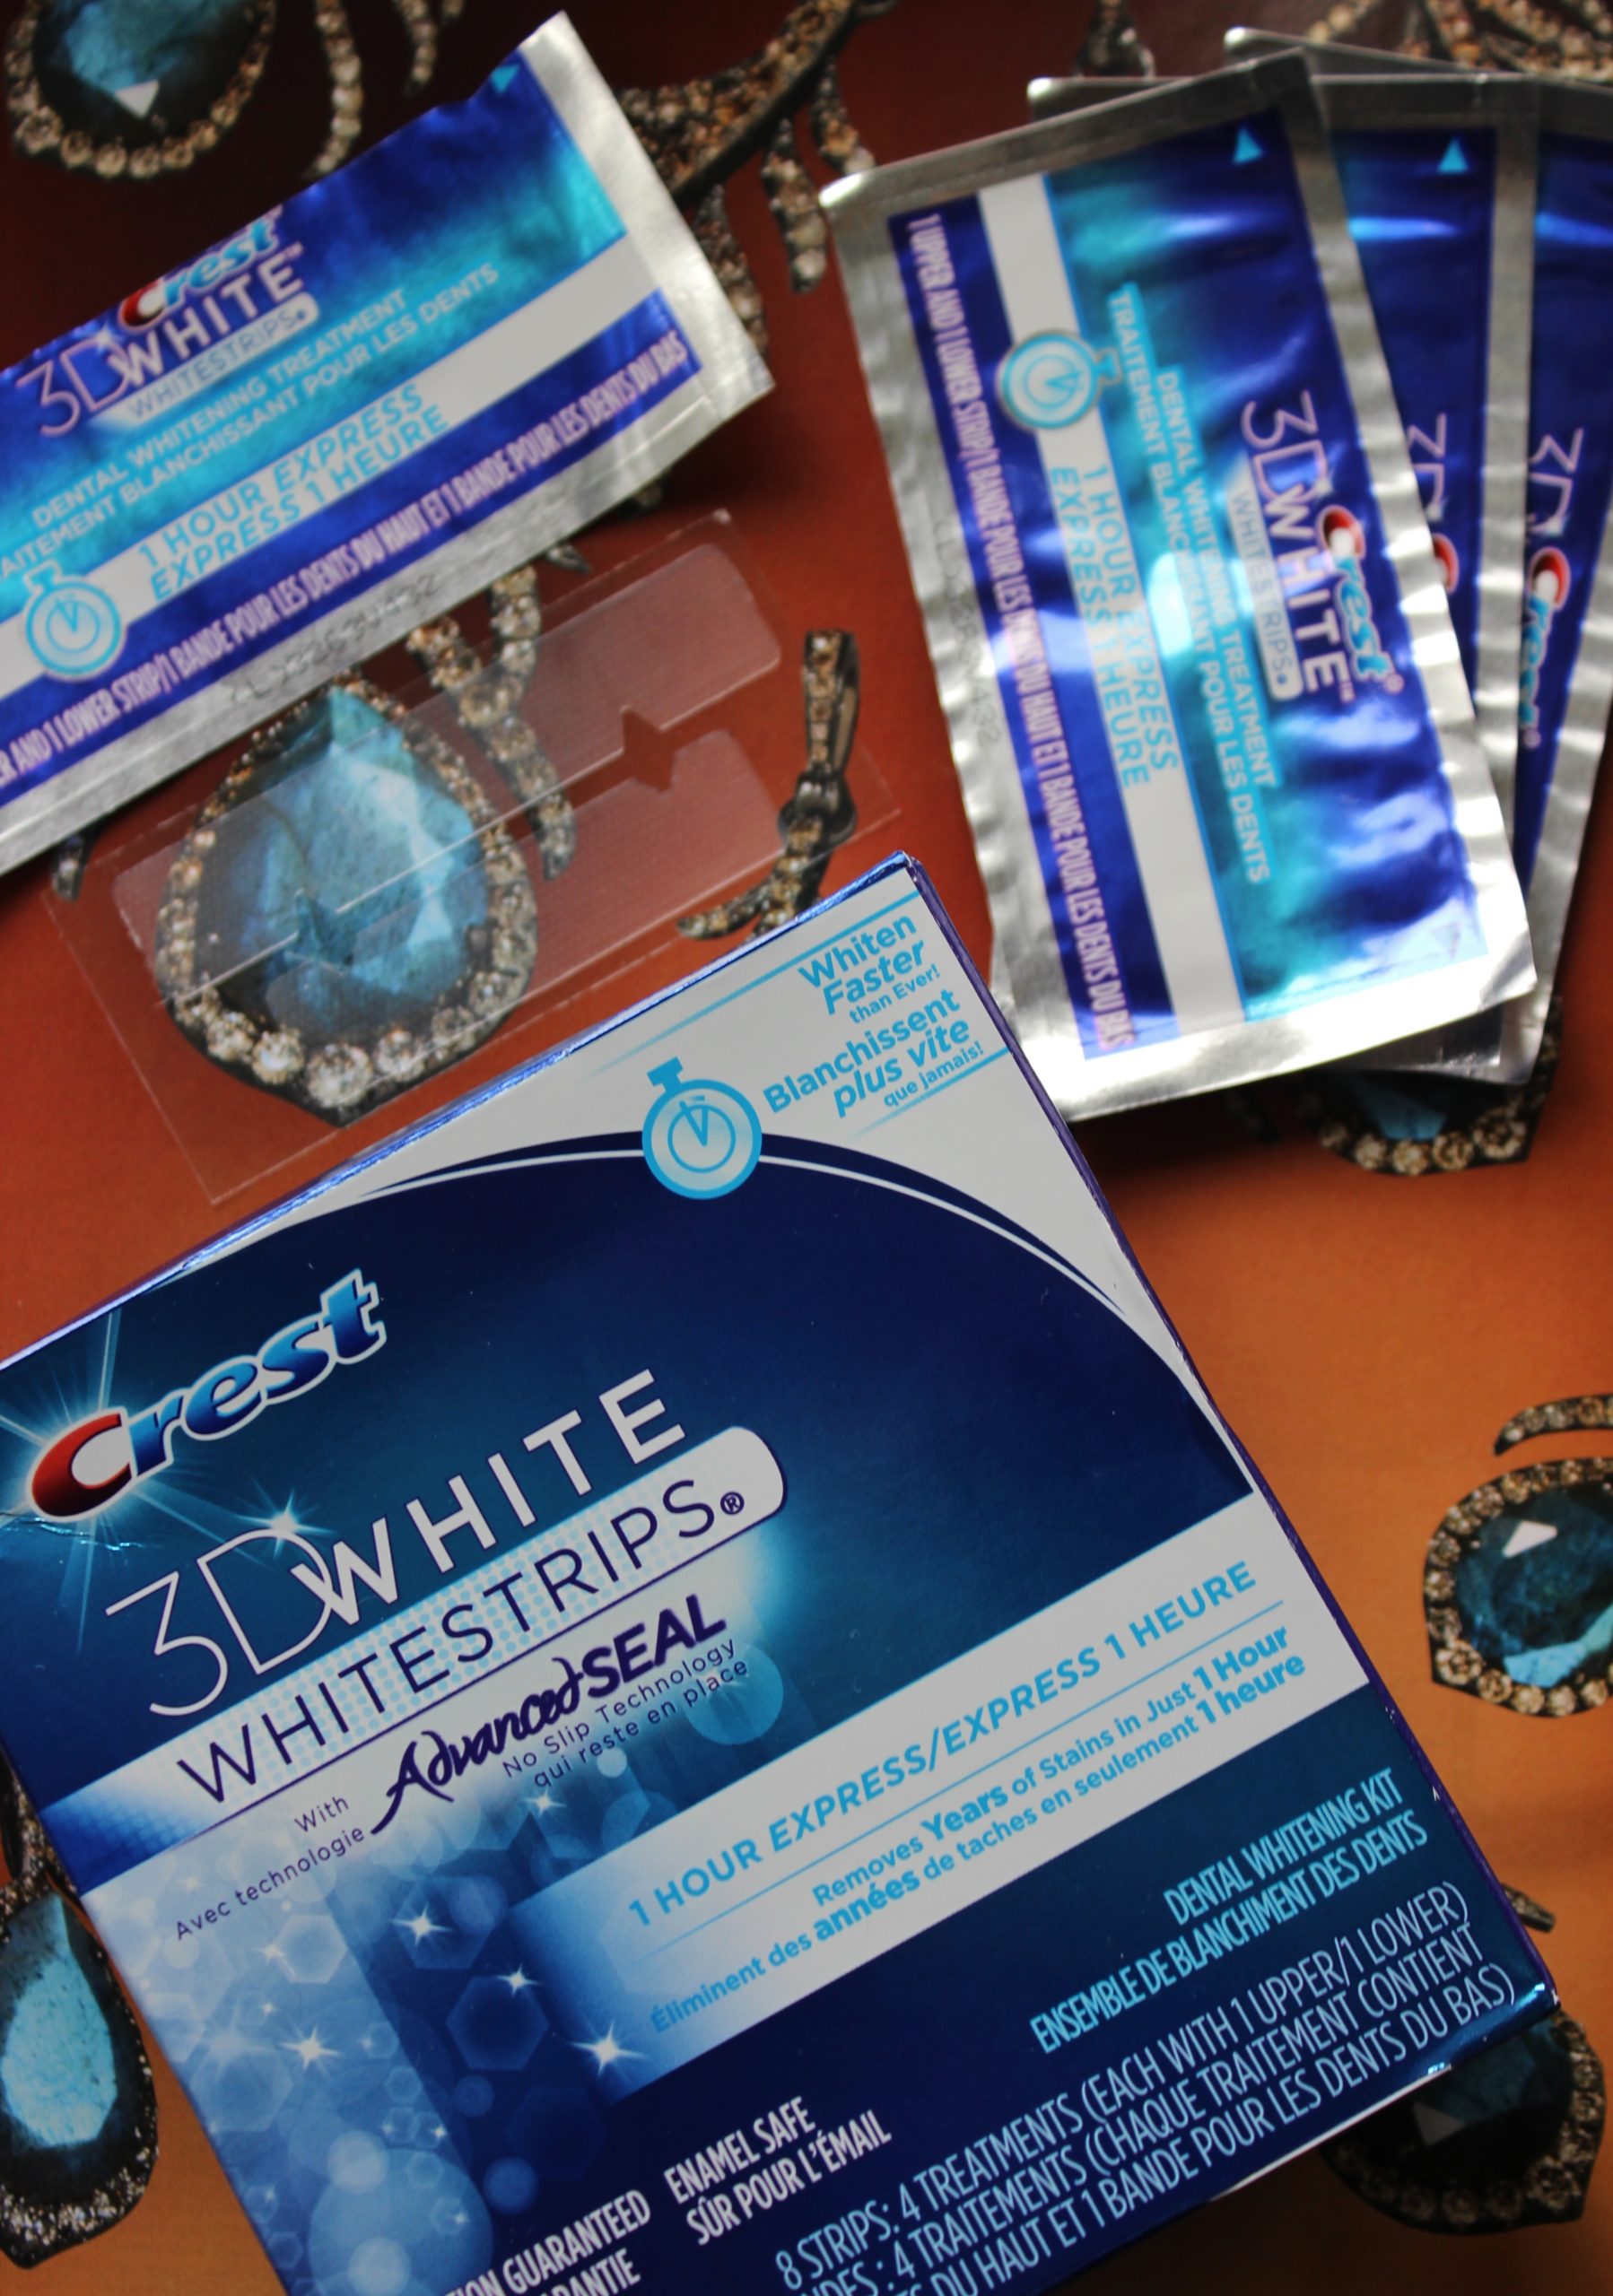 crest 1 hour express whitening strips review, uk, where to buy